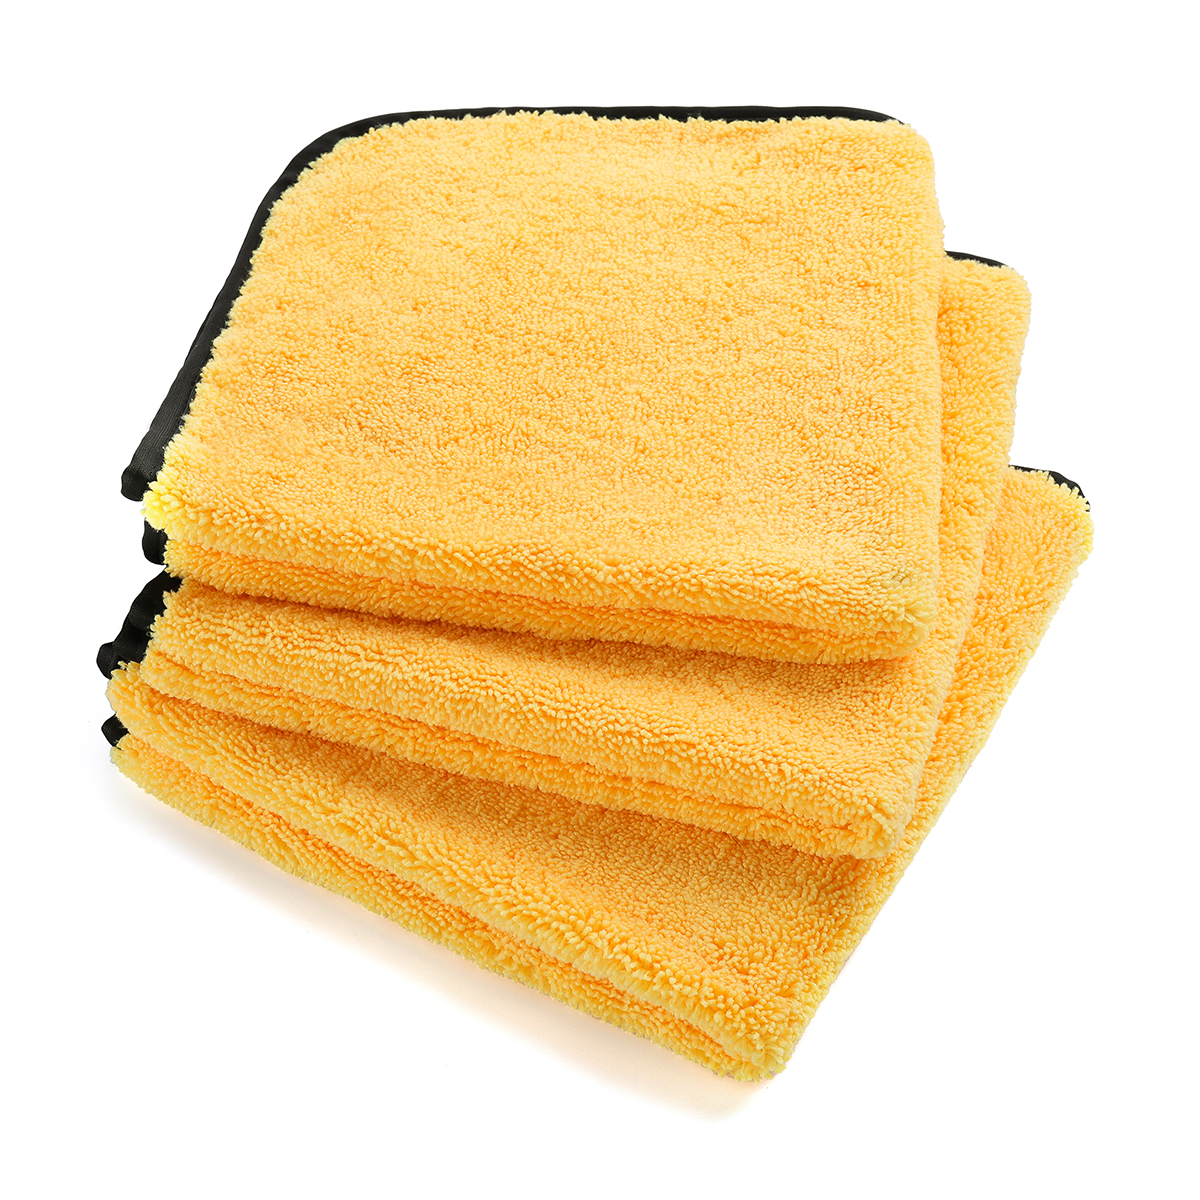 MATCC 12PCS Super Absorbent Microfiber Car Cleaning Towels Cleaning Cloths Vehicle Professional Care Washable Multi Use